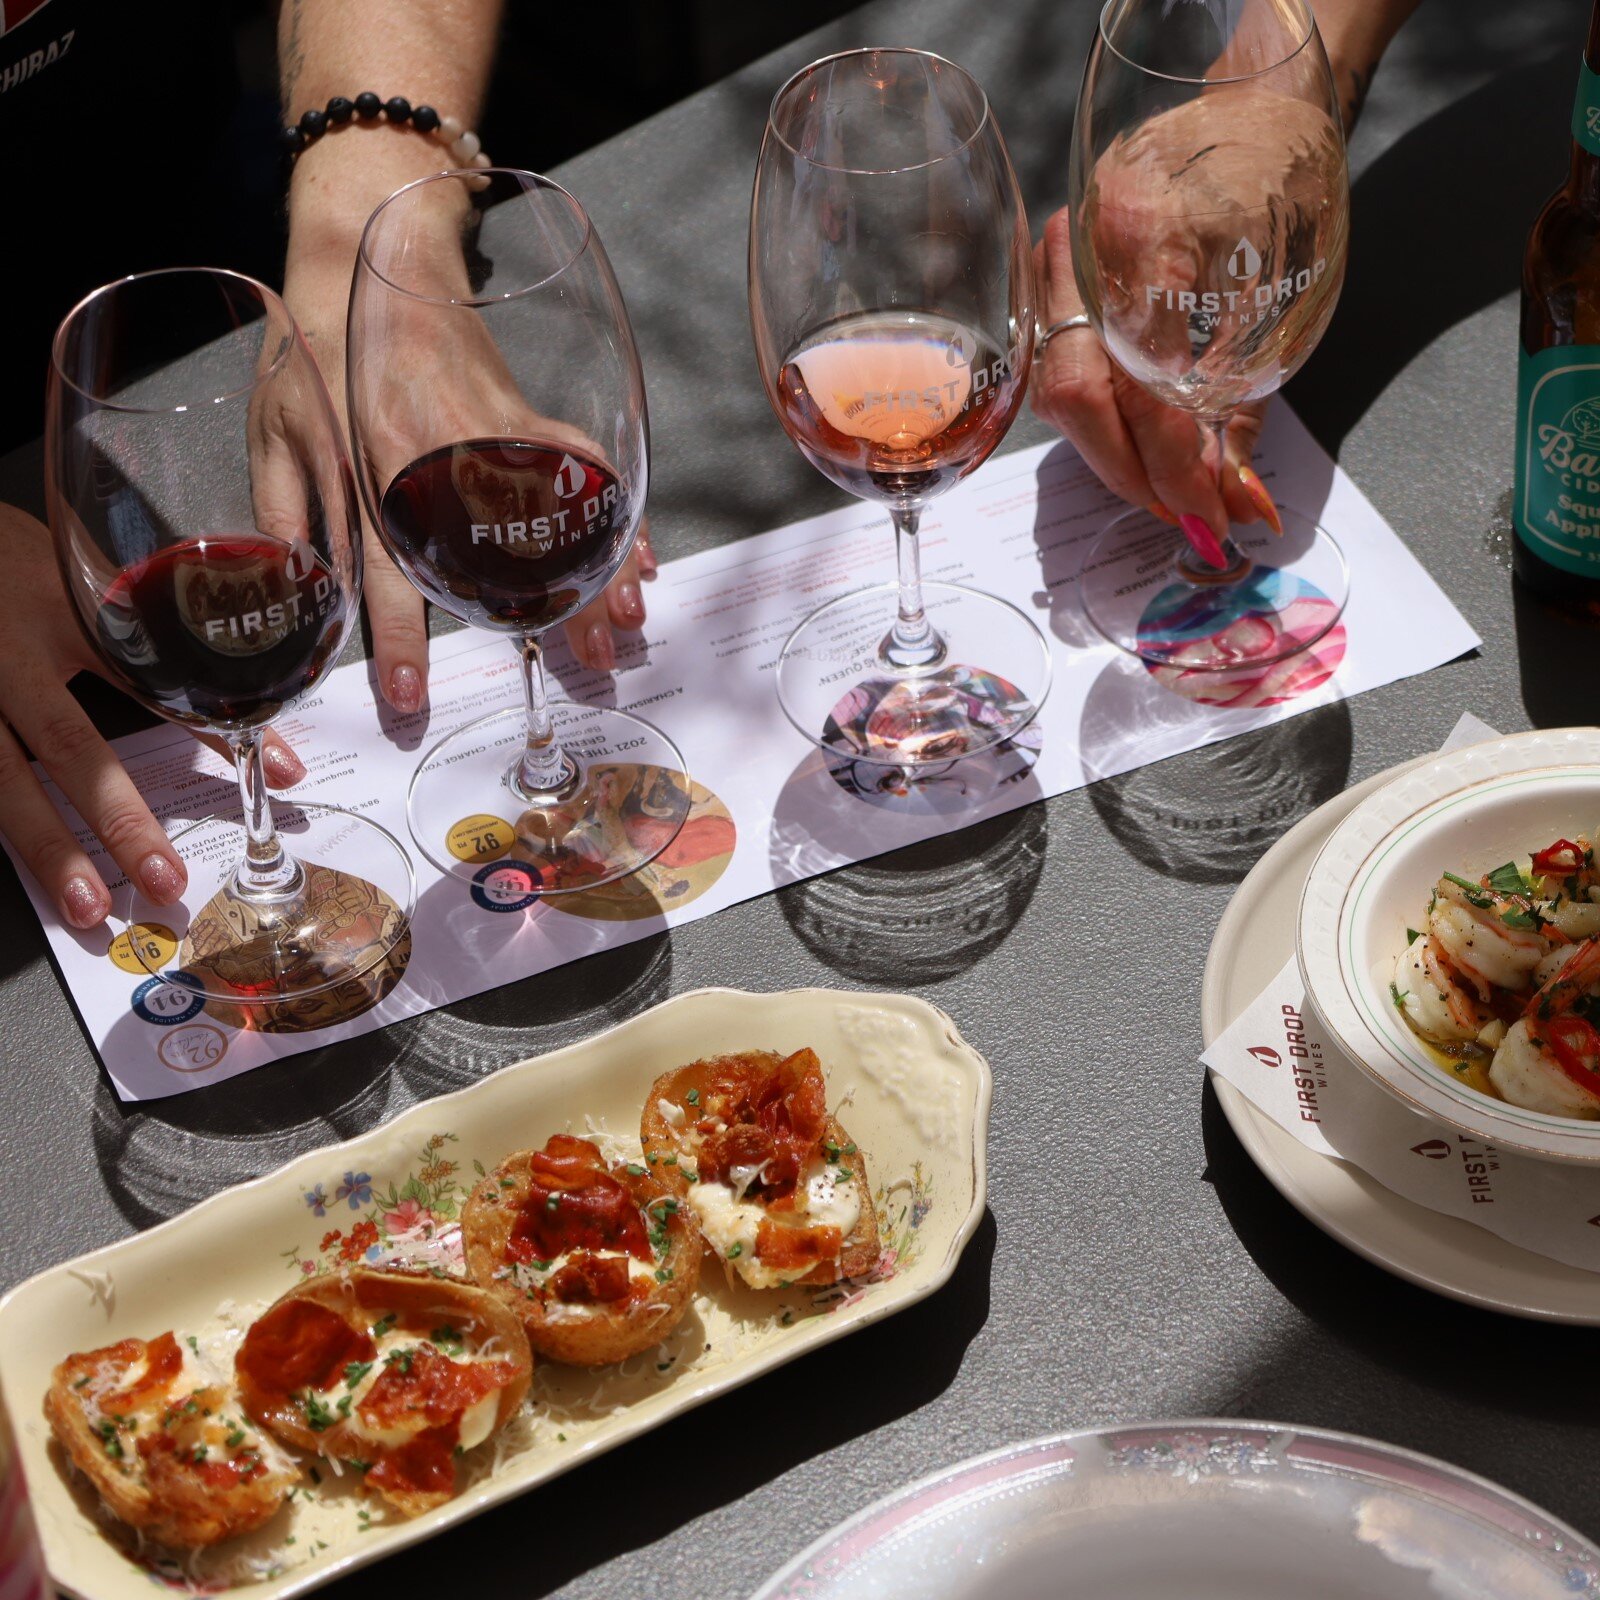 At @firstdropwines, award-winning reds and whites are best accompanied by an innovative mix of traditional and seasonal tapas. This delicious food + wine combination makes for a crowd-pleasing, effortlessly long lunch in the heart of the Barossa. 🍷
